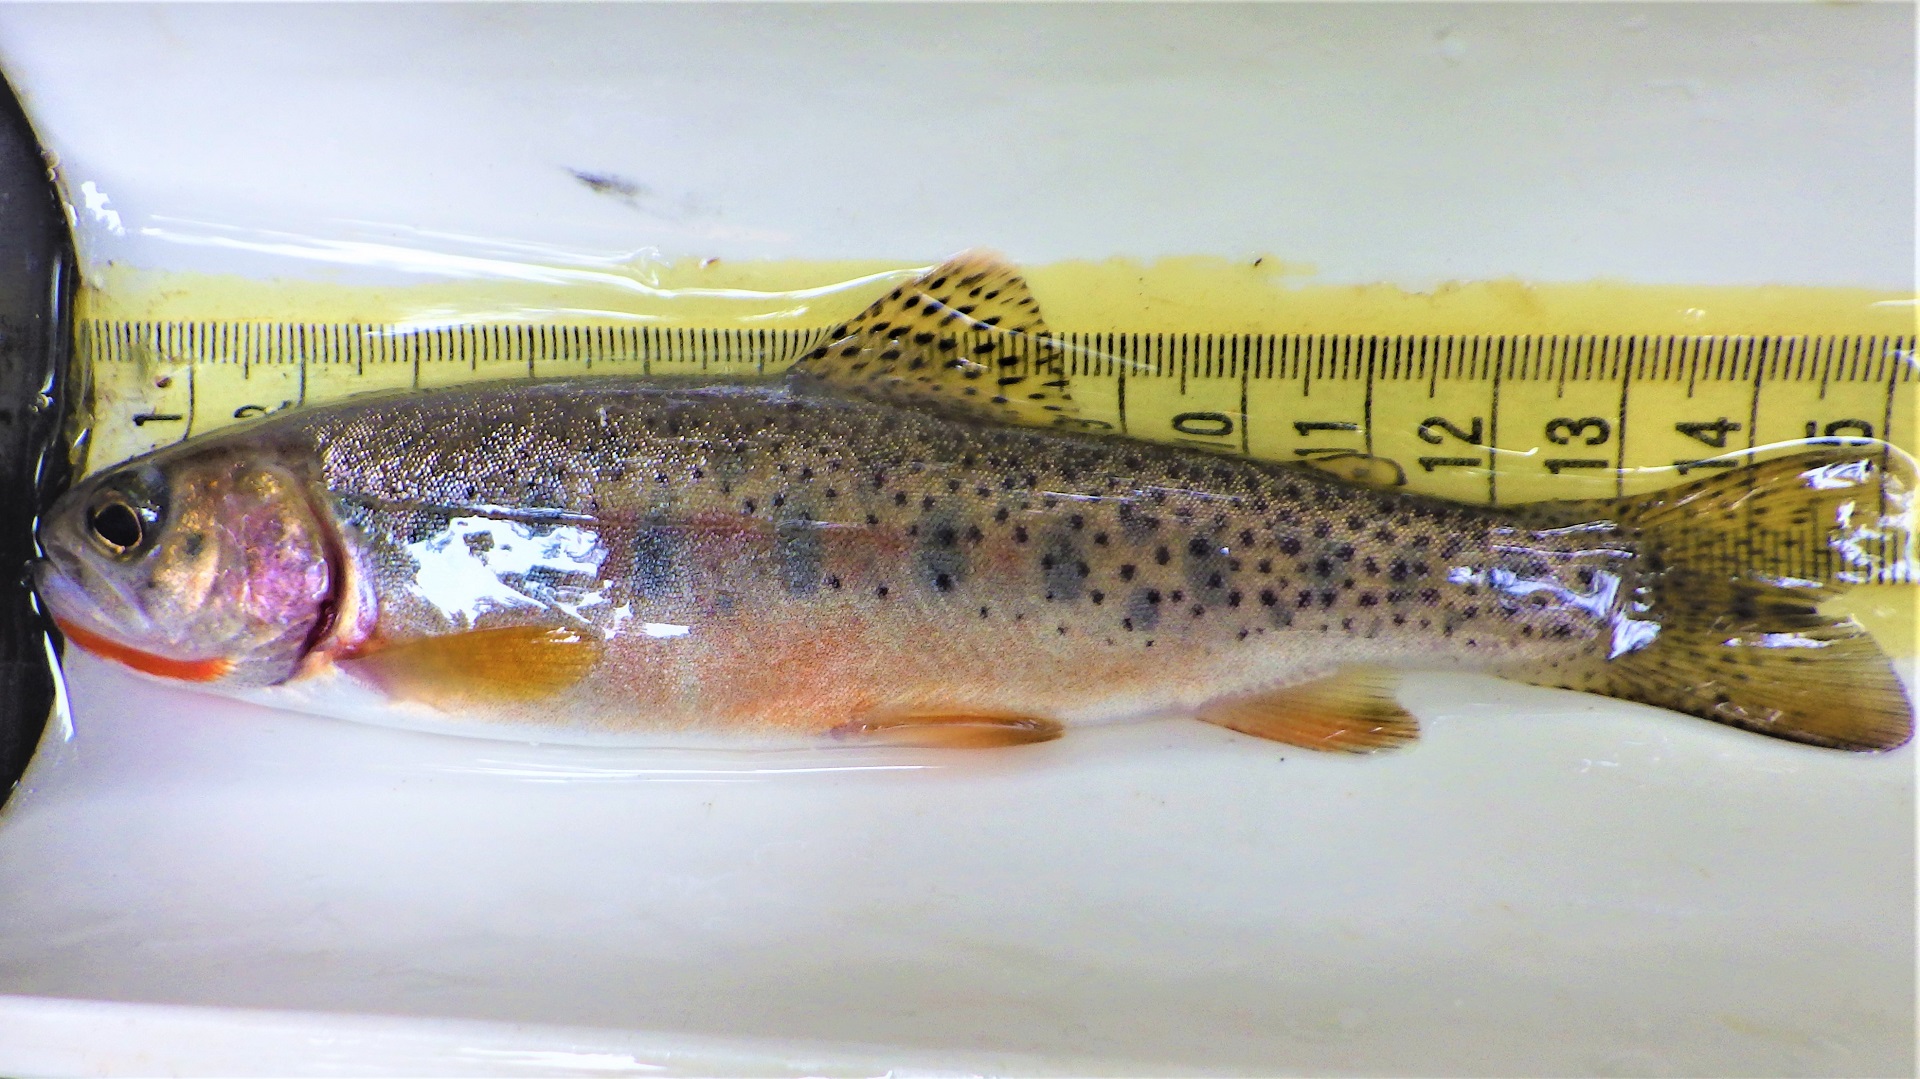 A trout with small black spots on a measuring board